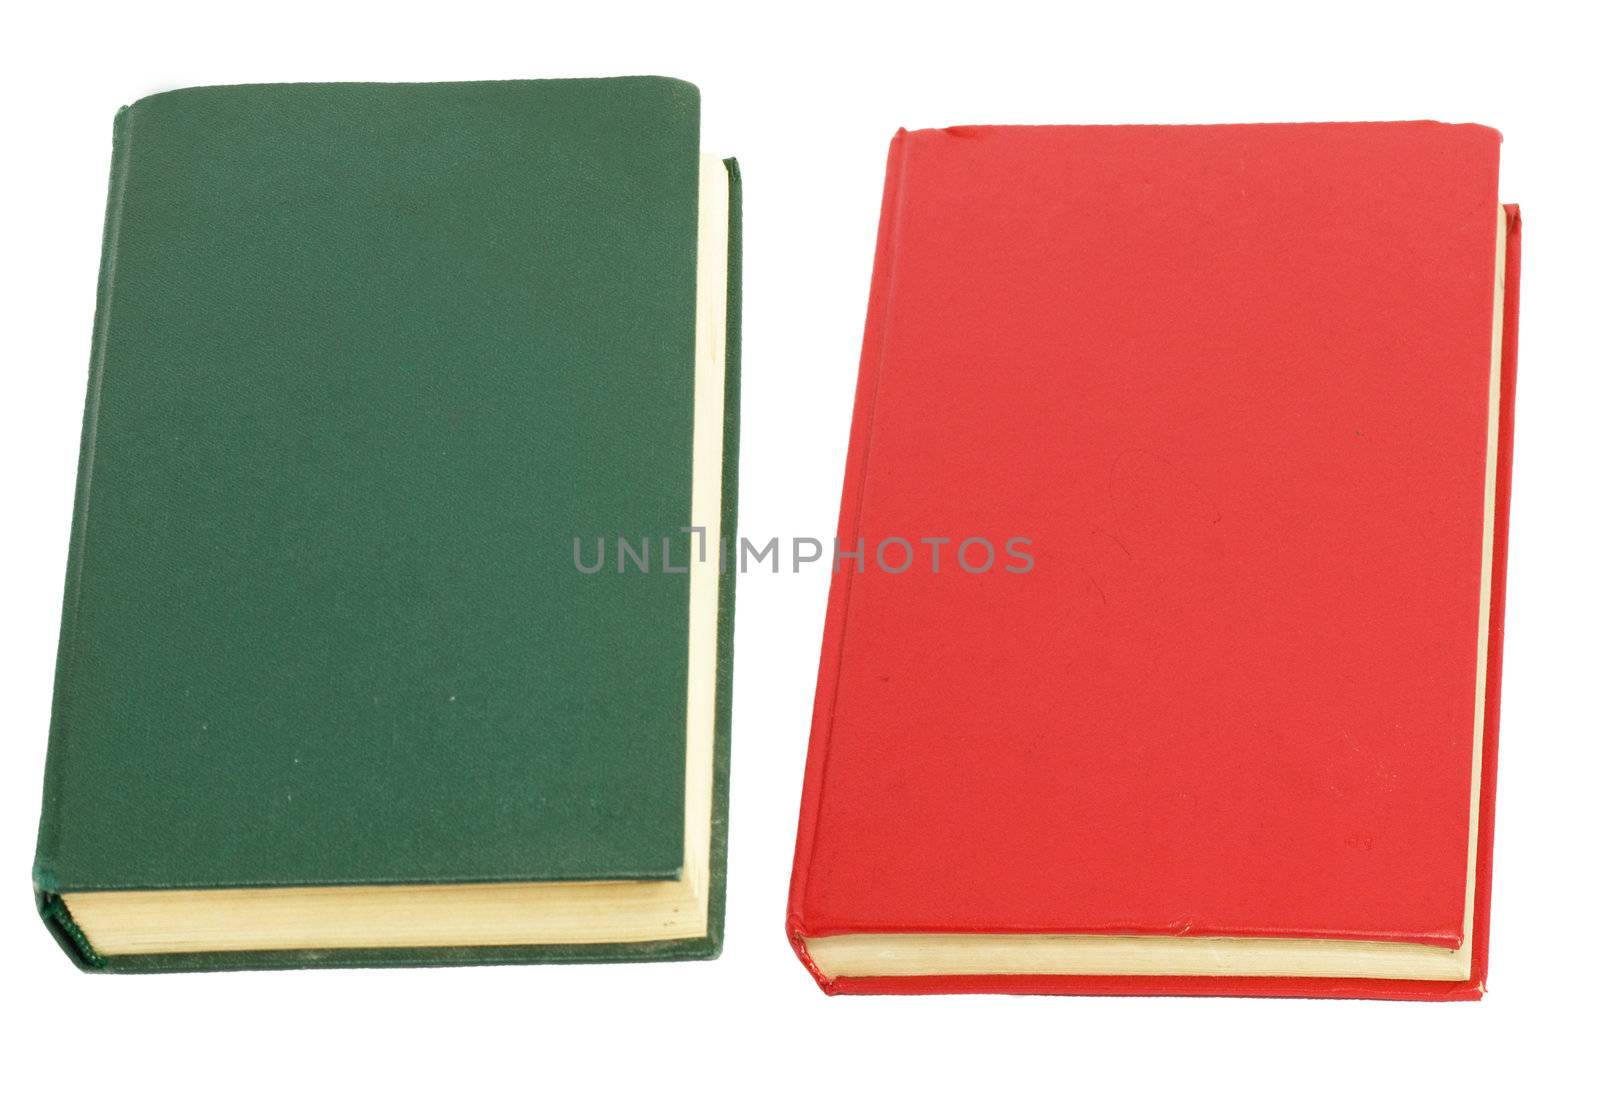 green book and red book on white background  by schankz